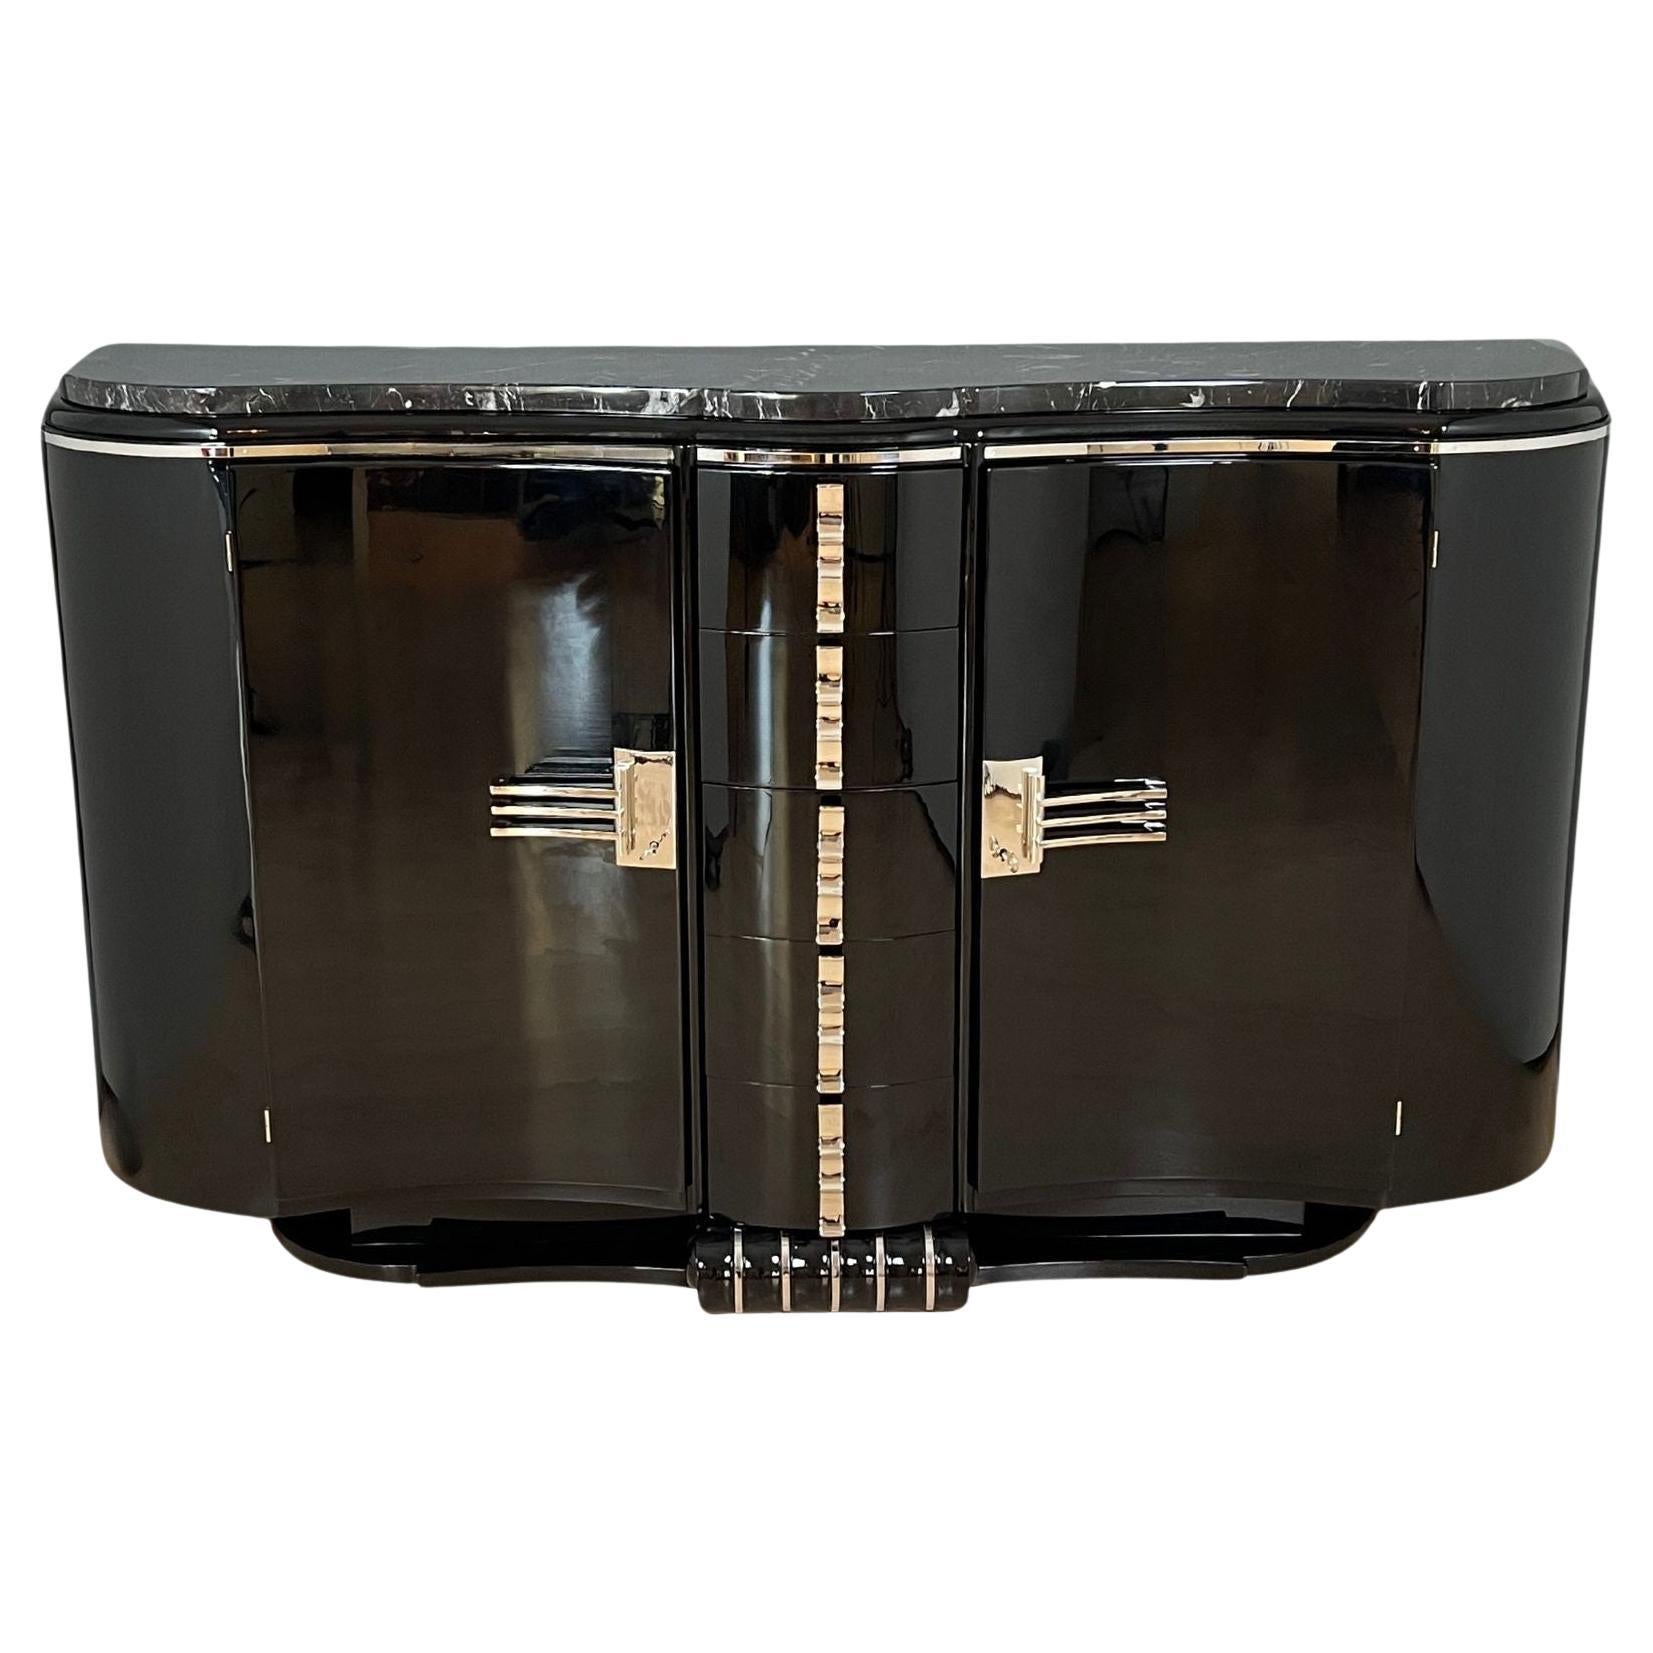 Art Deco Sideboard, Black Lacquer, Chrome, Marble, France circa 1930 For Sale